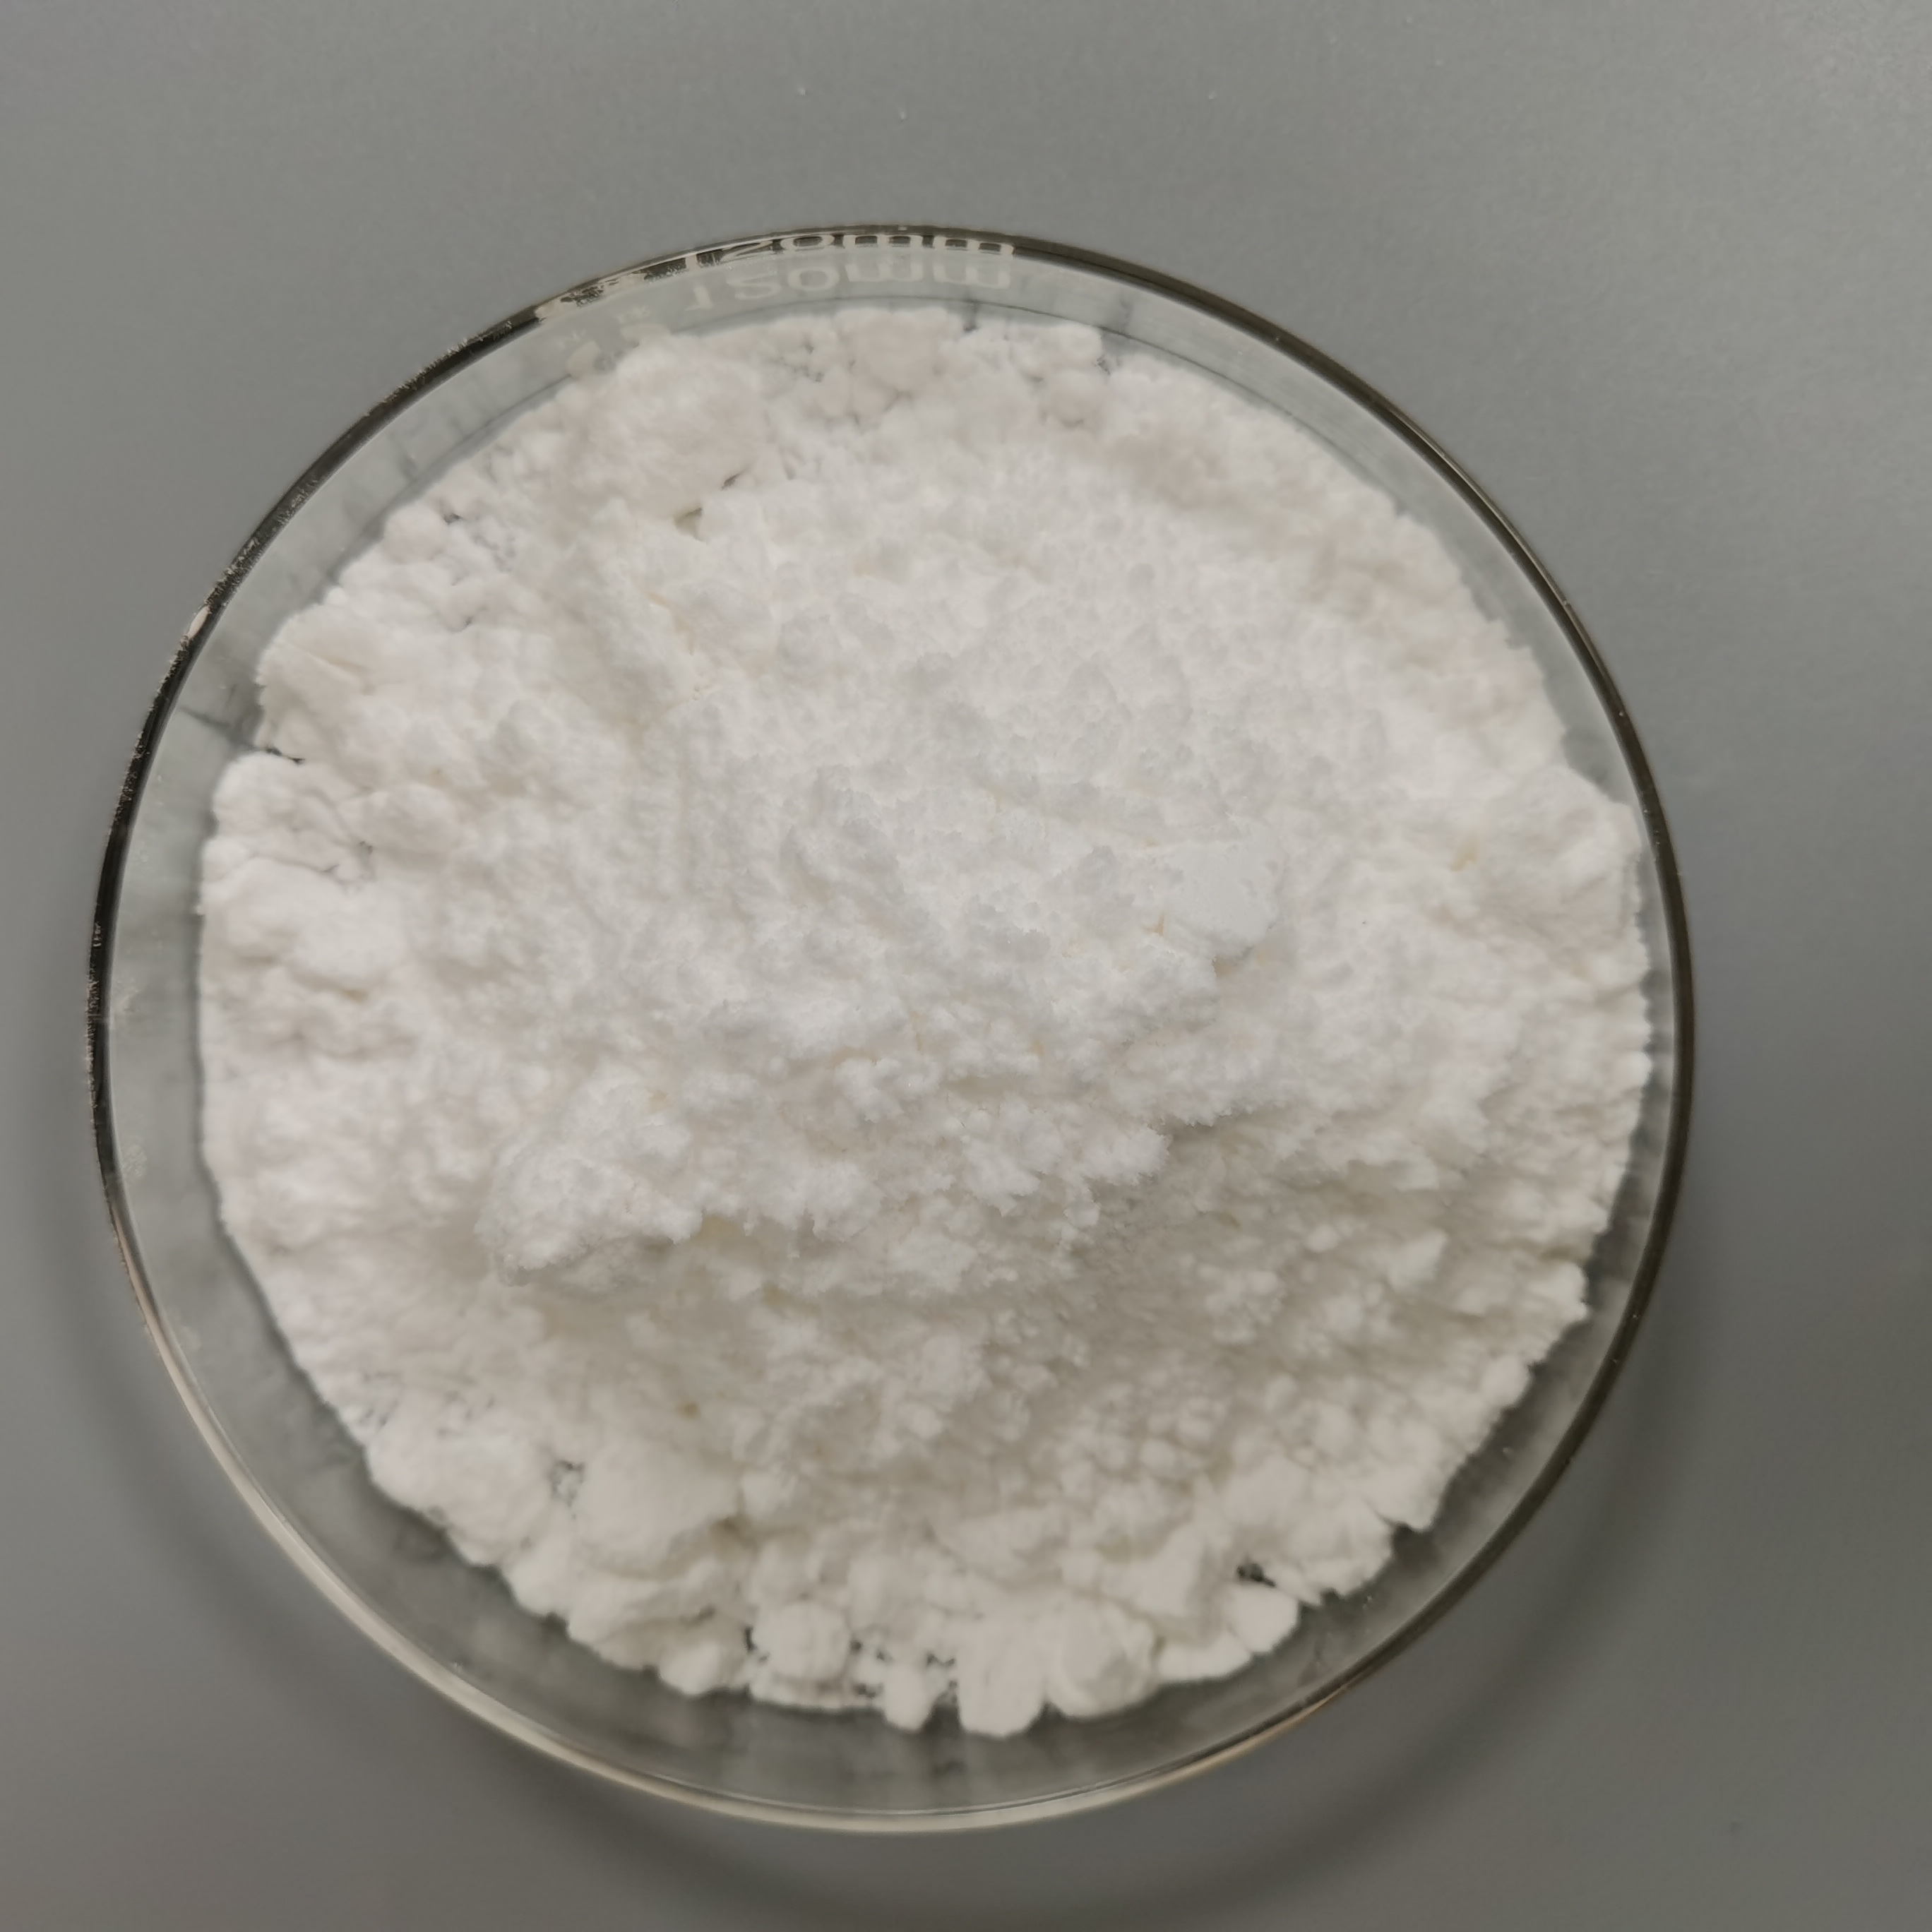 Duble Clearance Best Price 705-60-2 P2np 1-Phenyl-2-nitropropene Via Secure Line Delivery